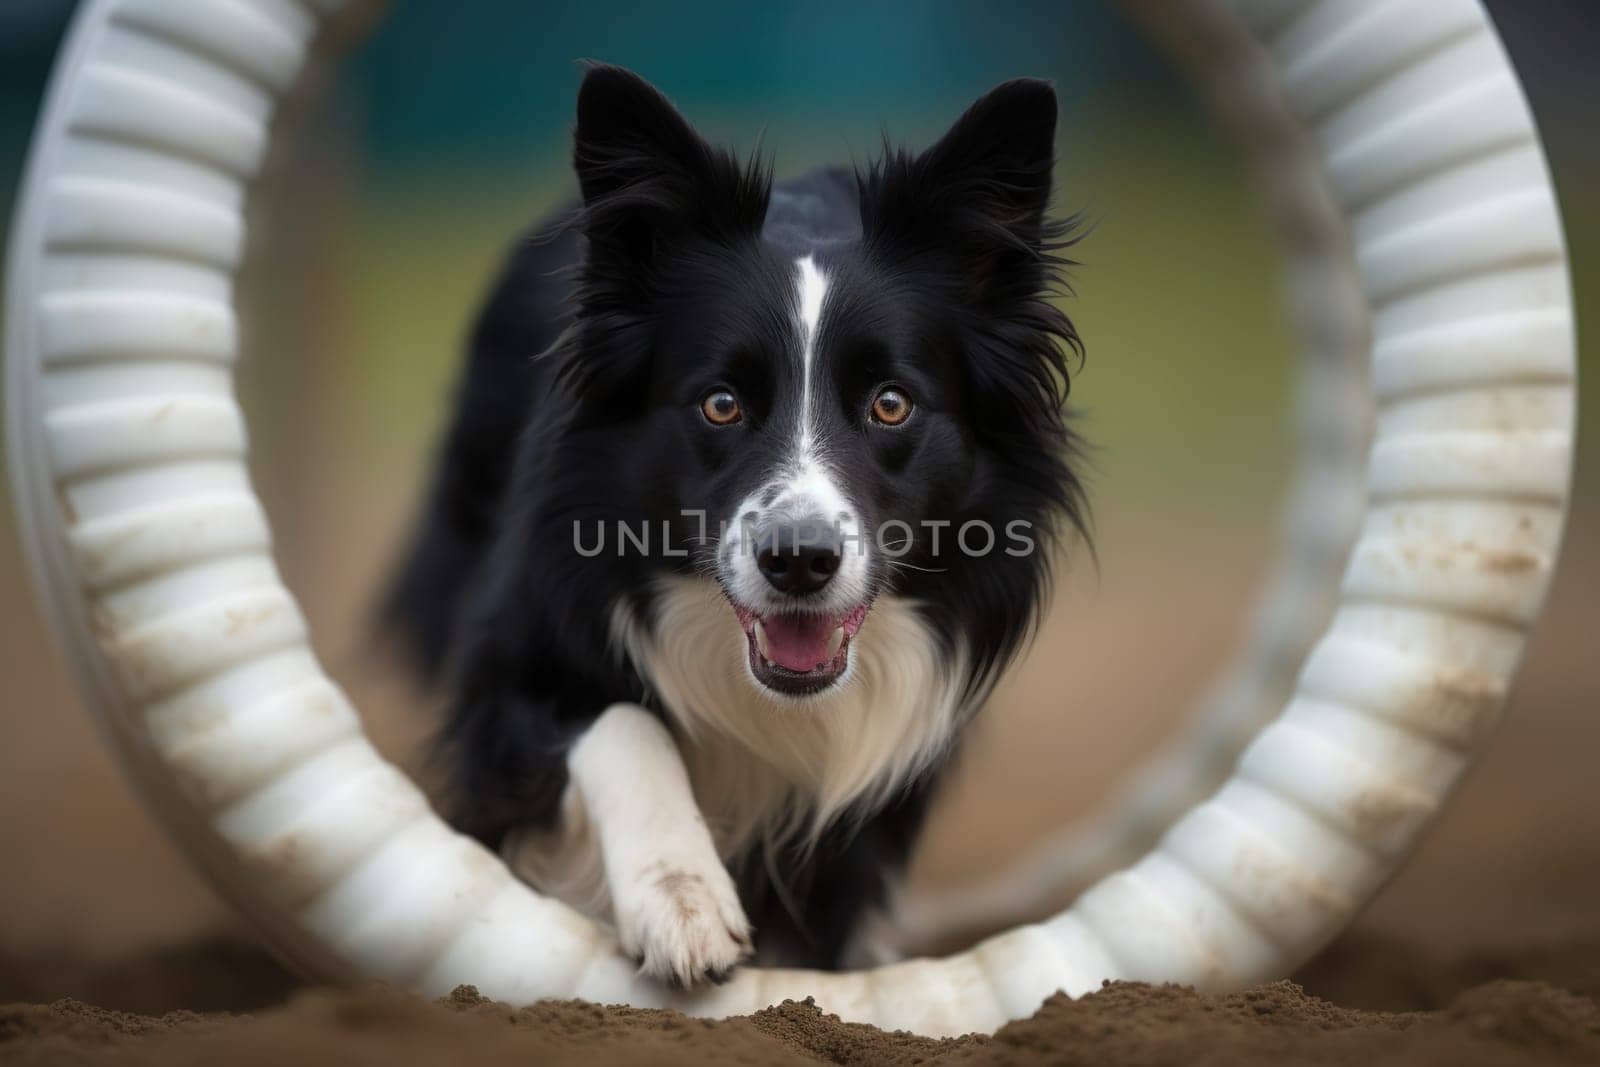 Watch A Smart Border Collie Skillfully Tackle An Obstacle Course With Precision